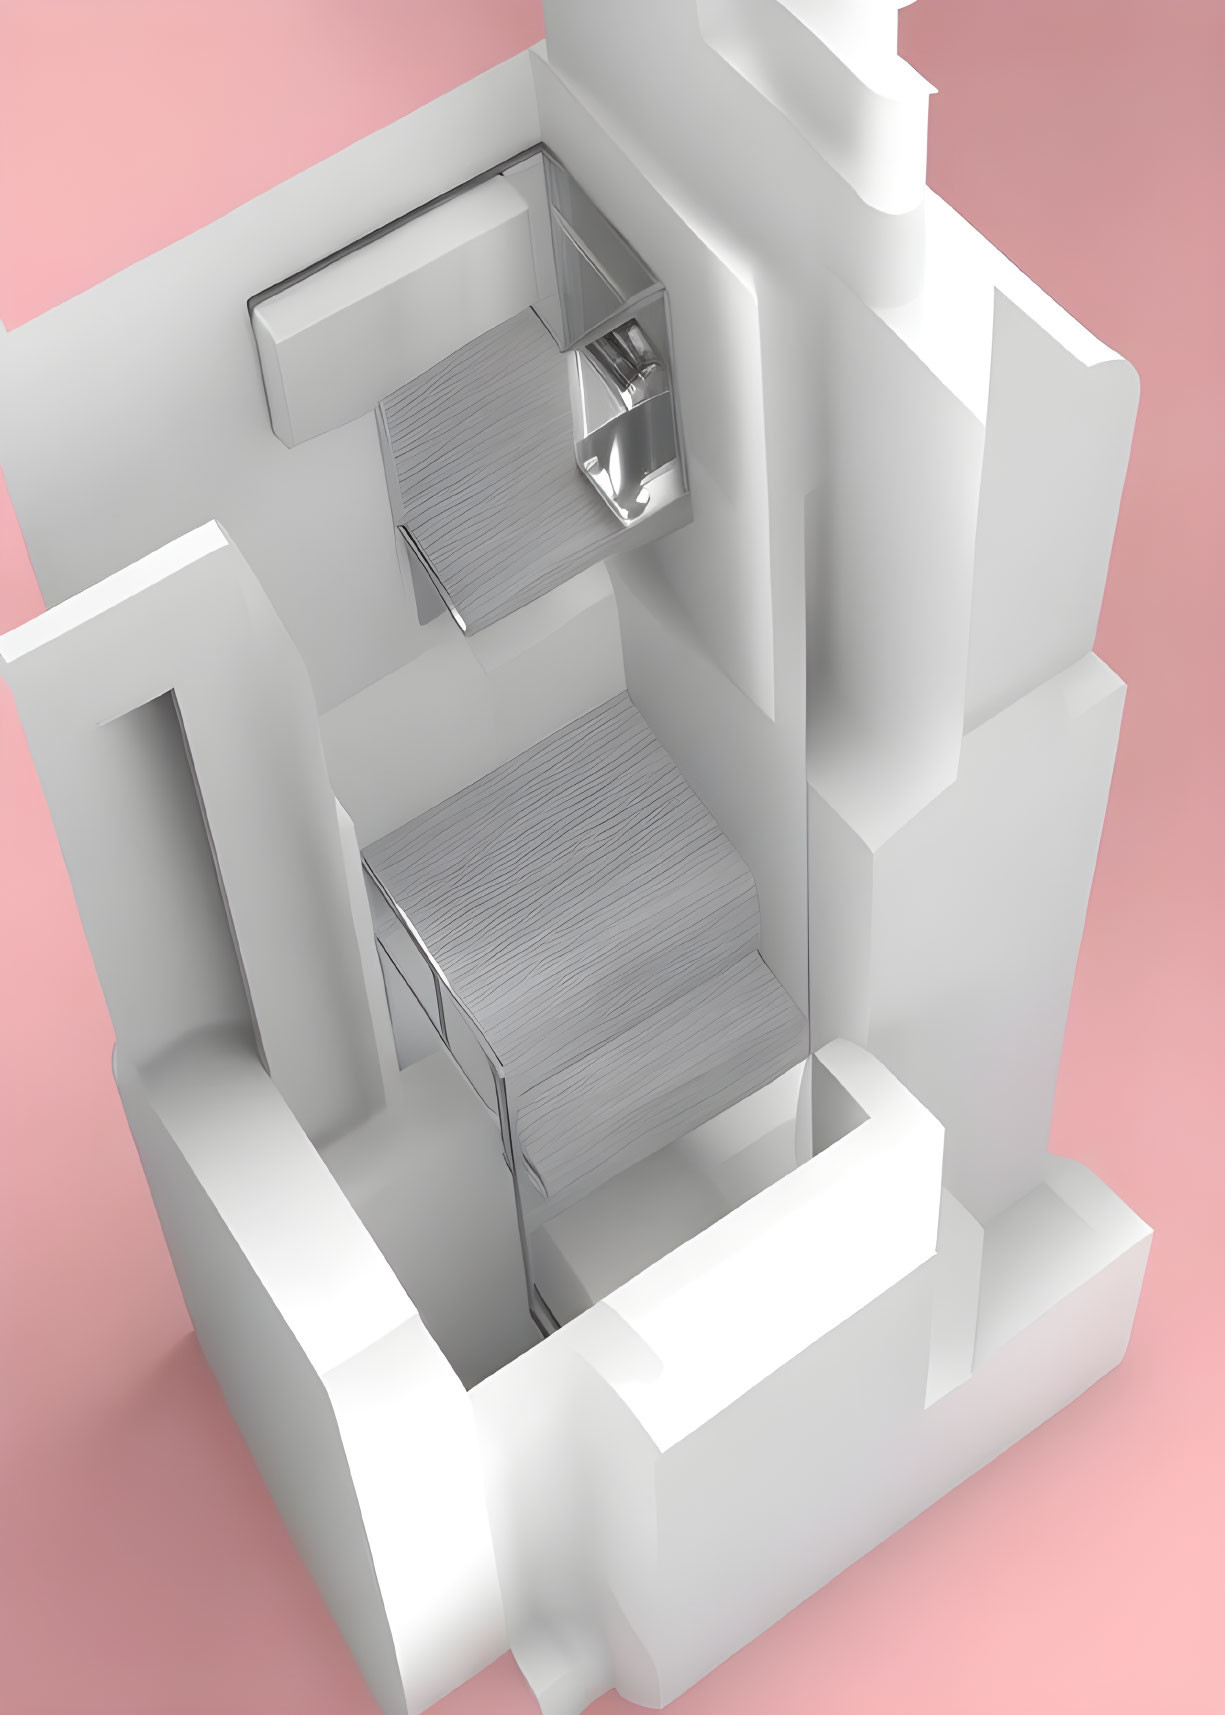 White Escher-Like Impossible Staircase on Pink Background